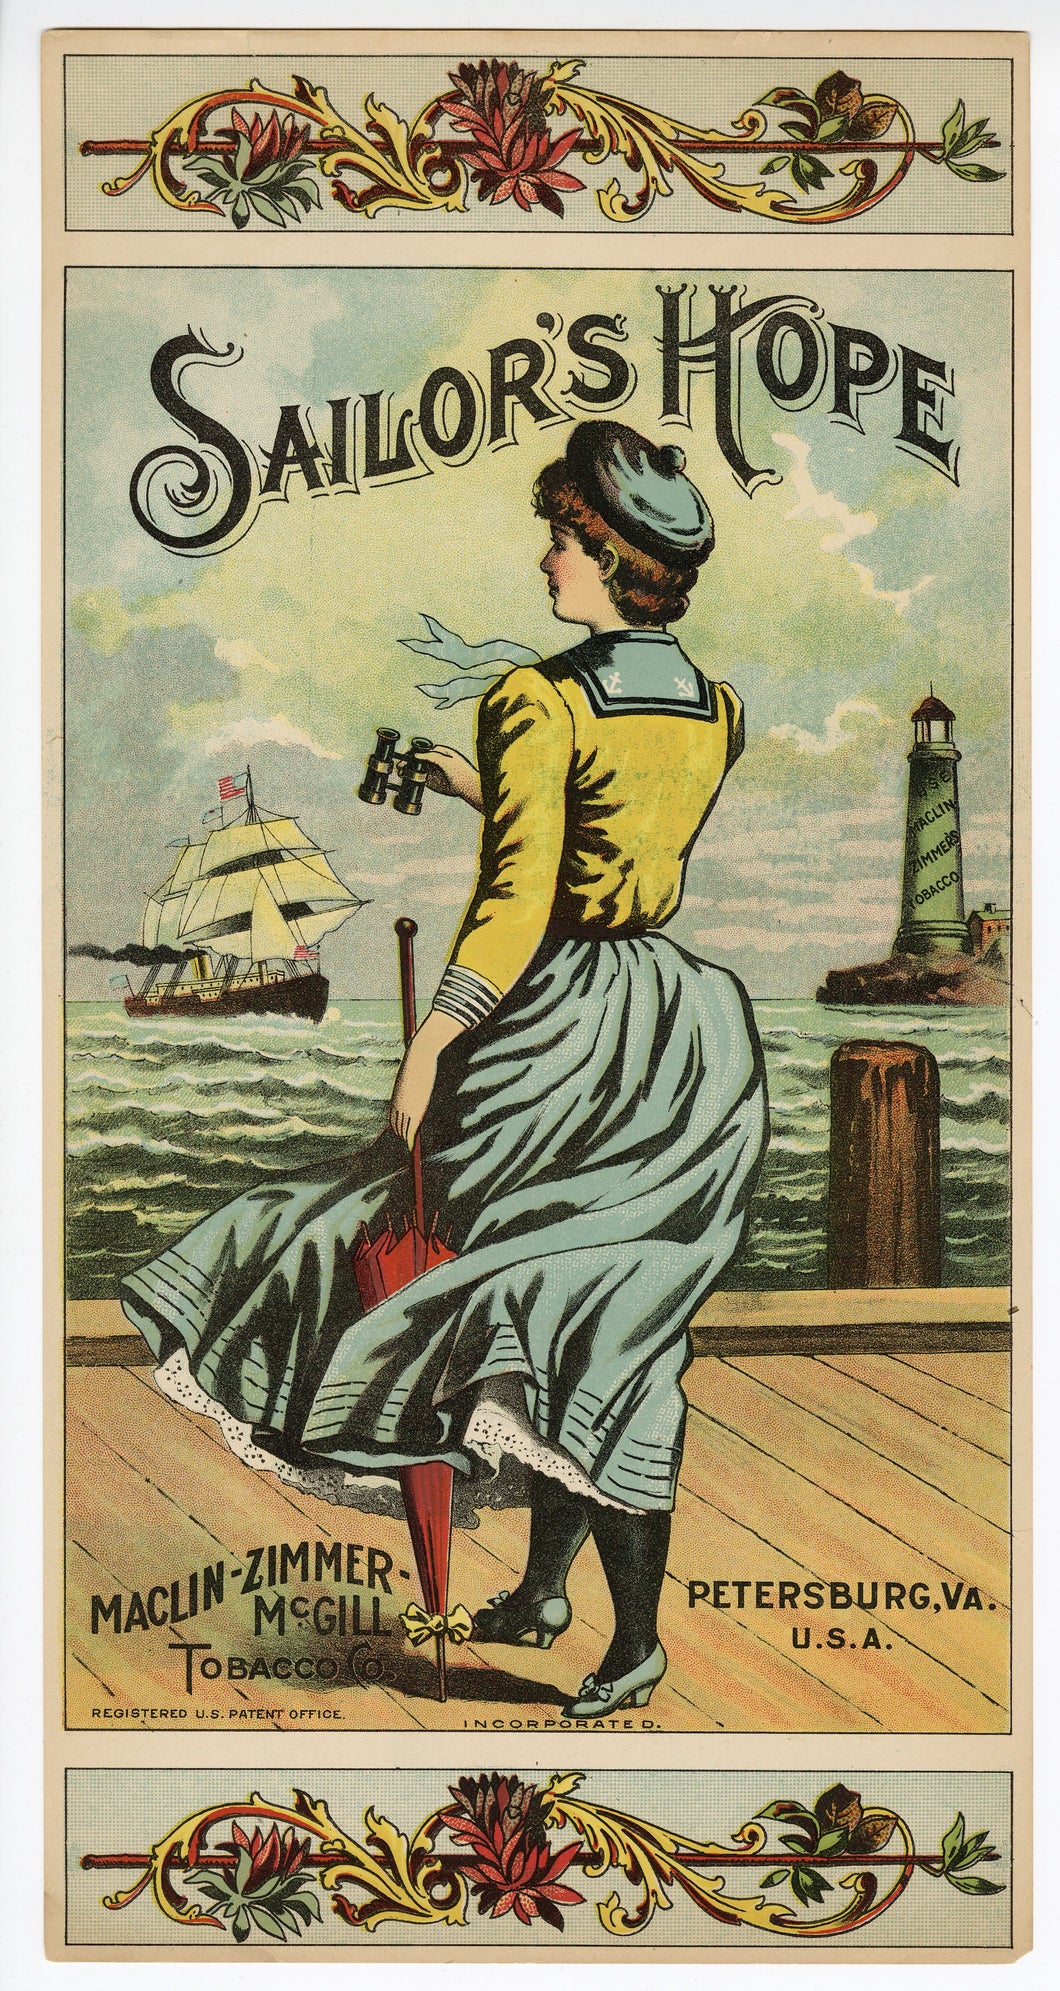 SAILOR'S HOPE Caddy Label || Maclin-Zimmer McGill, Petersburg, Virginia, Woman Looking out to Sea, Old, Vintage - TheBoxSF